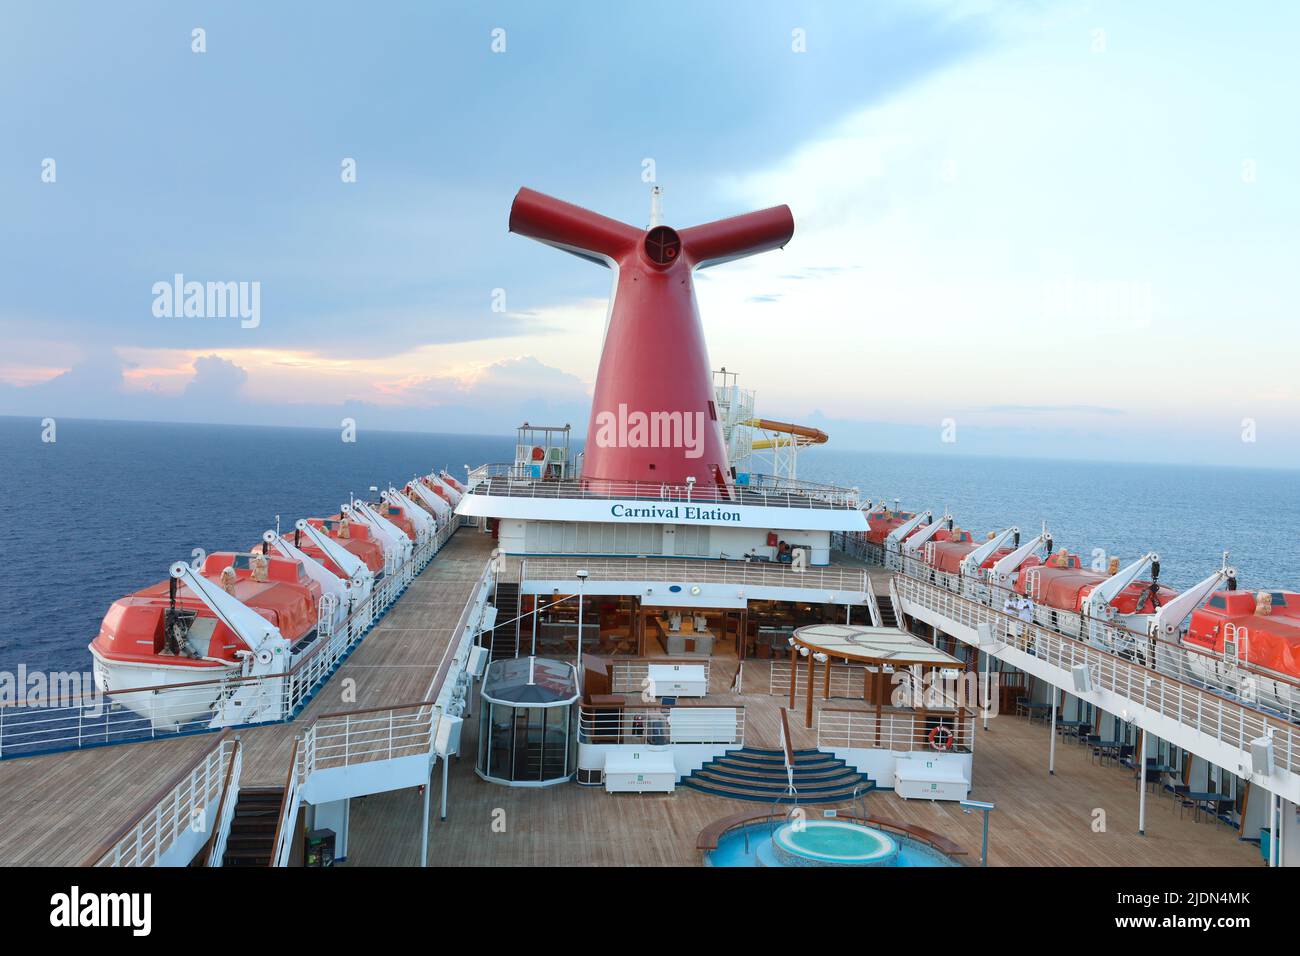 Panoramic shot of open decks and red funnel on CarnivalElation Carnival Valor, Carnival Fascination, blue sky with white clouds in the background. Stock Photo